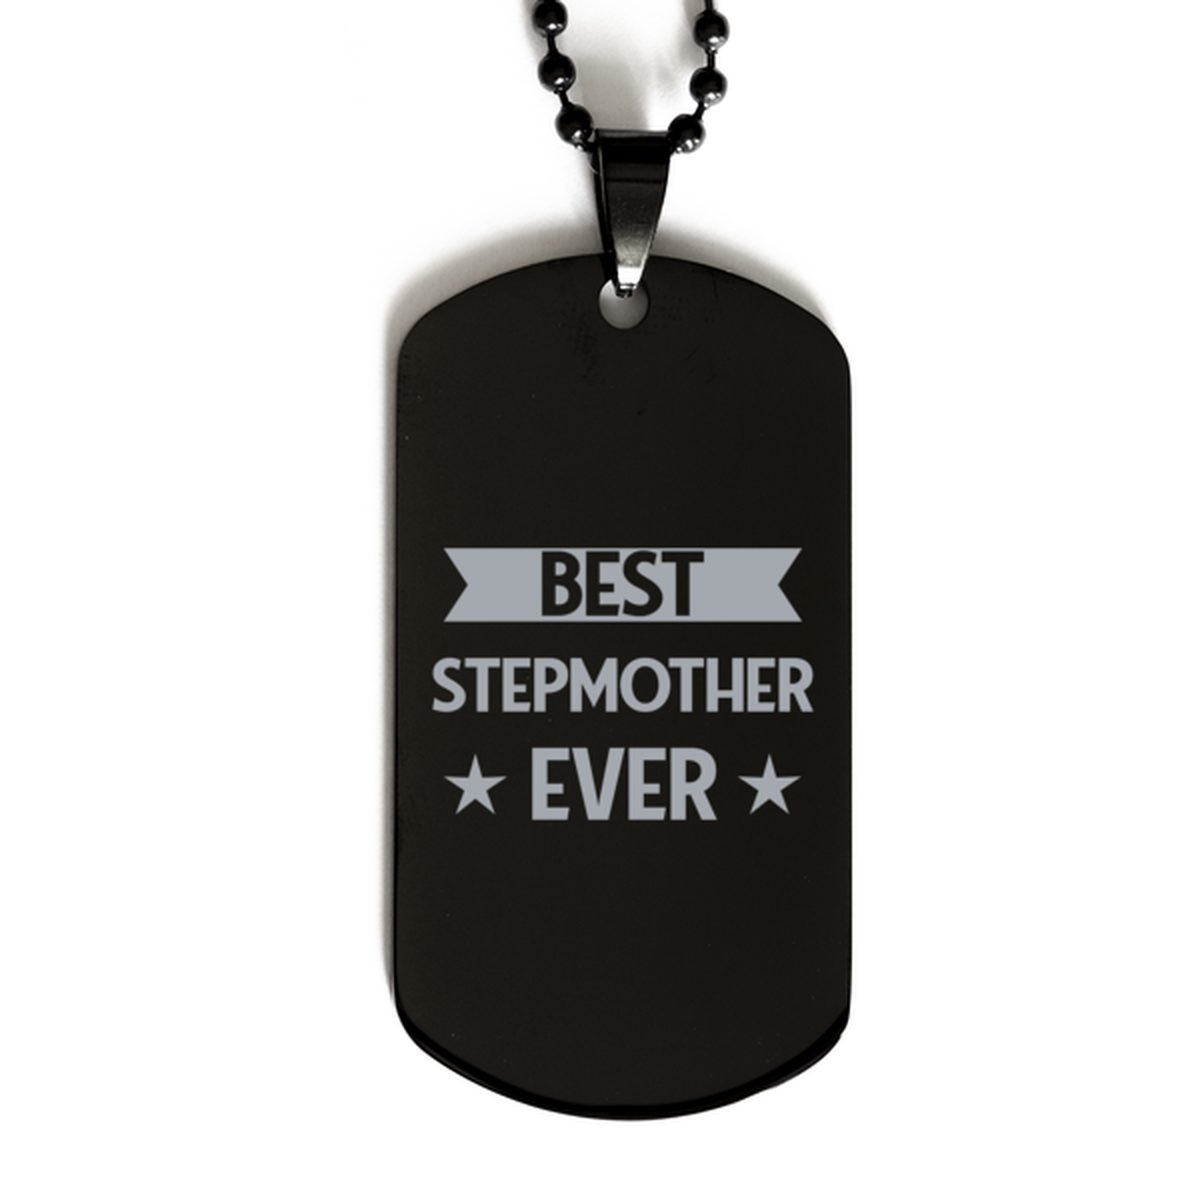 Best Stepmother Ever Stepmother Gifts, Funny Black Dog Tag For Stepmother, Birthday Family Presents Engraved Necklace For Women